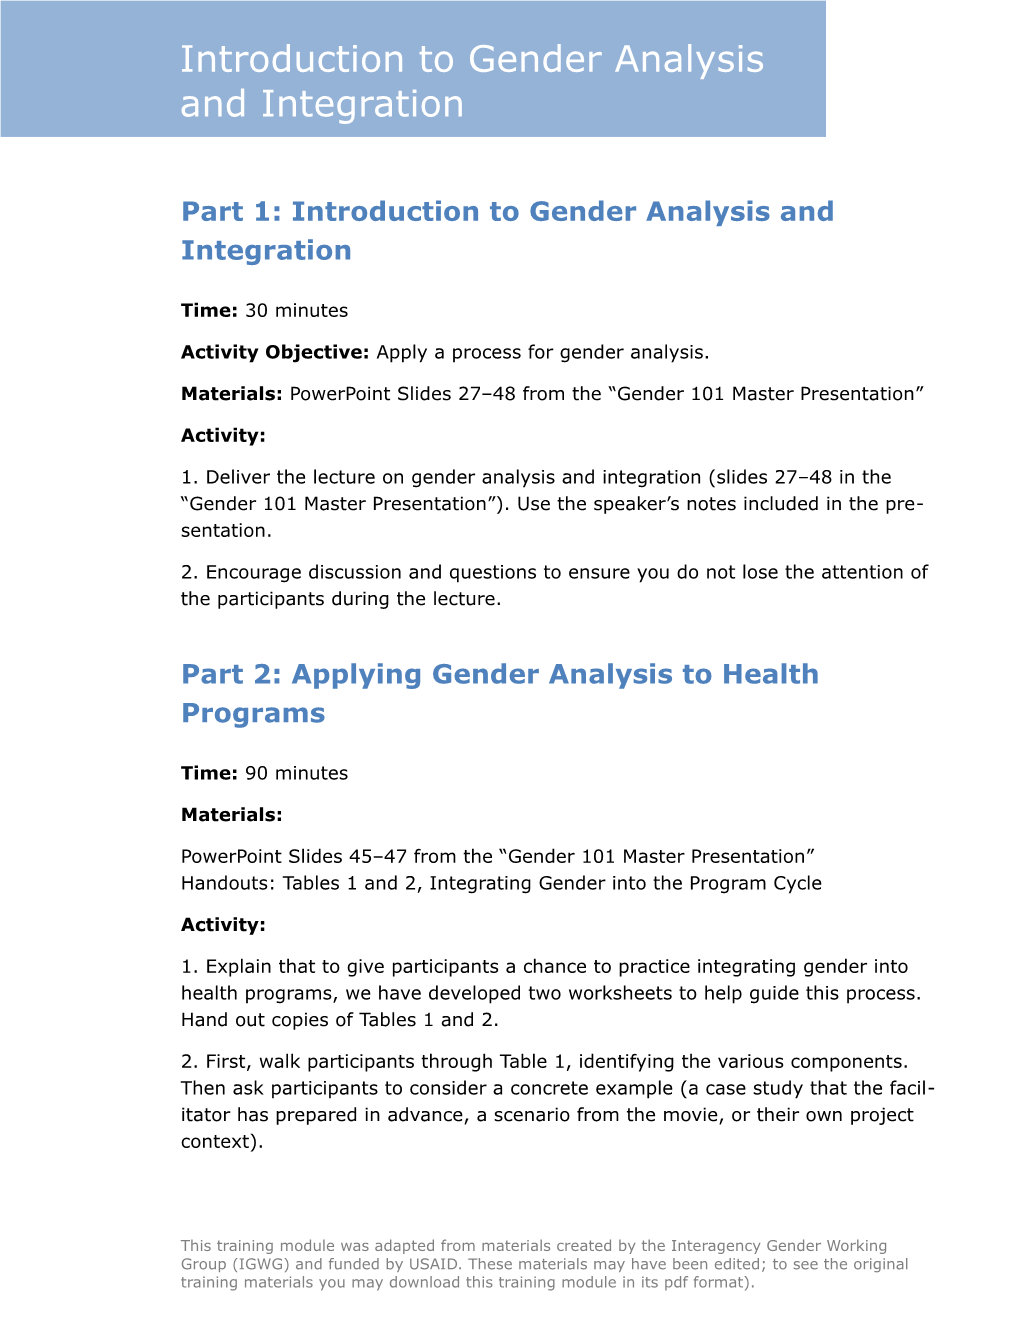 Part 1:Introduction to Gender Analysis and Integration